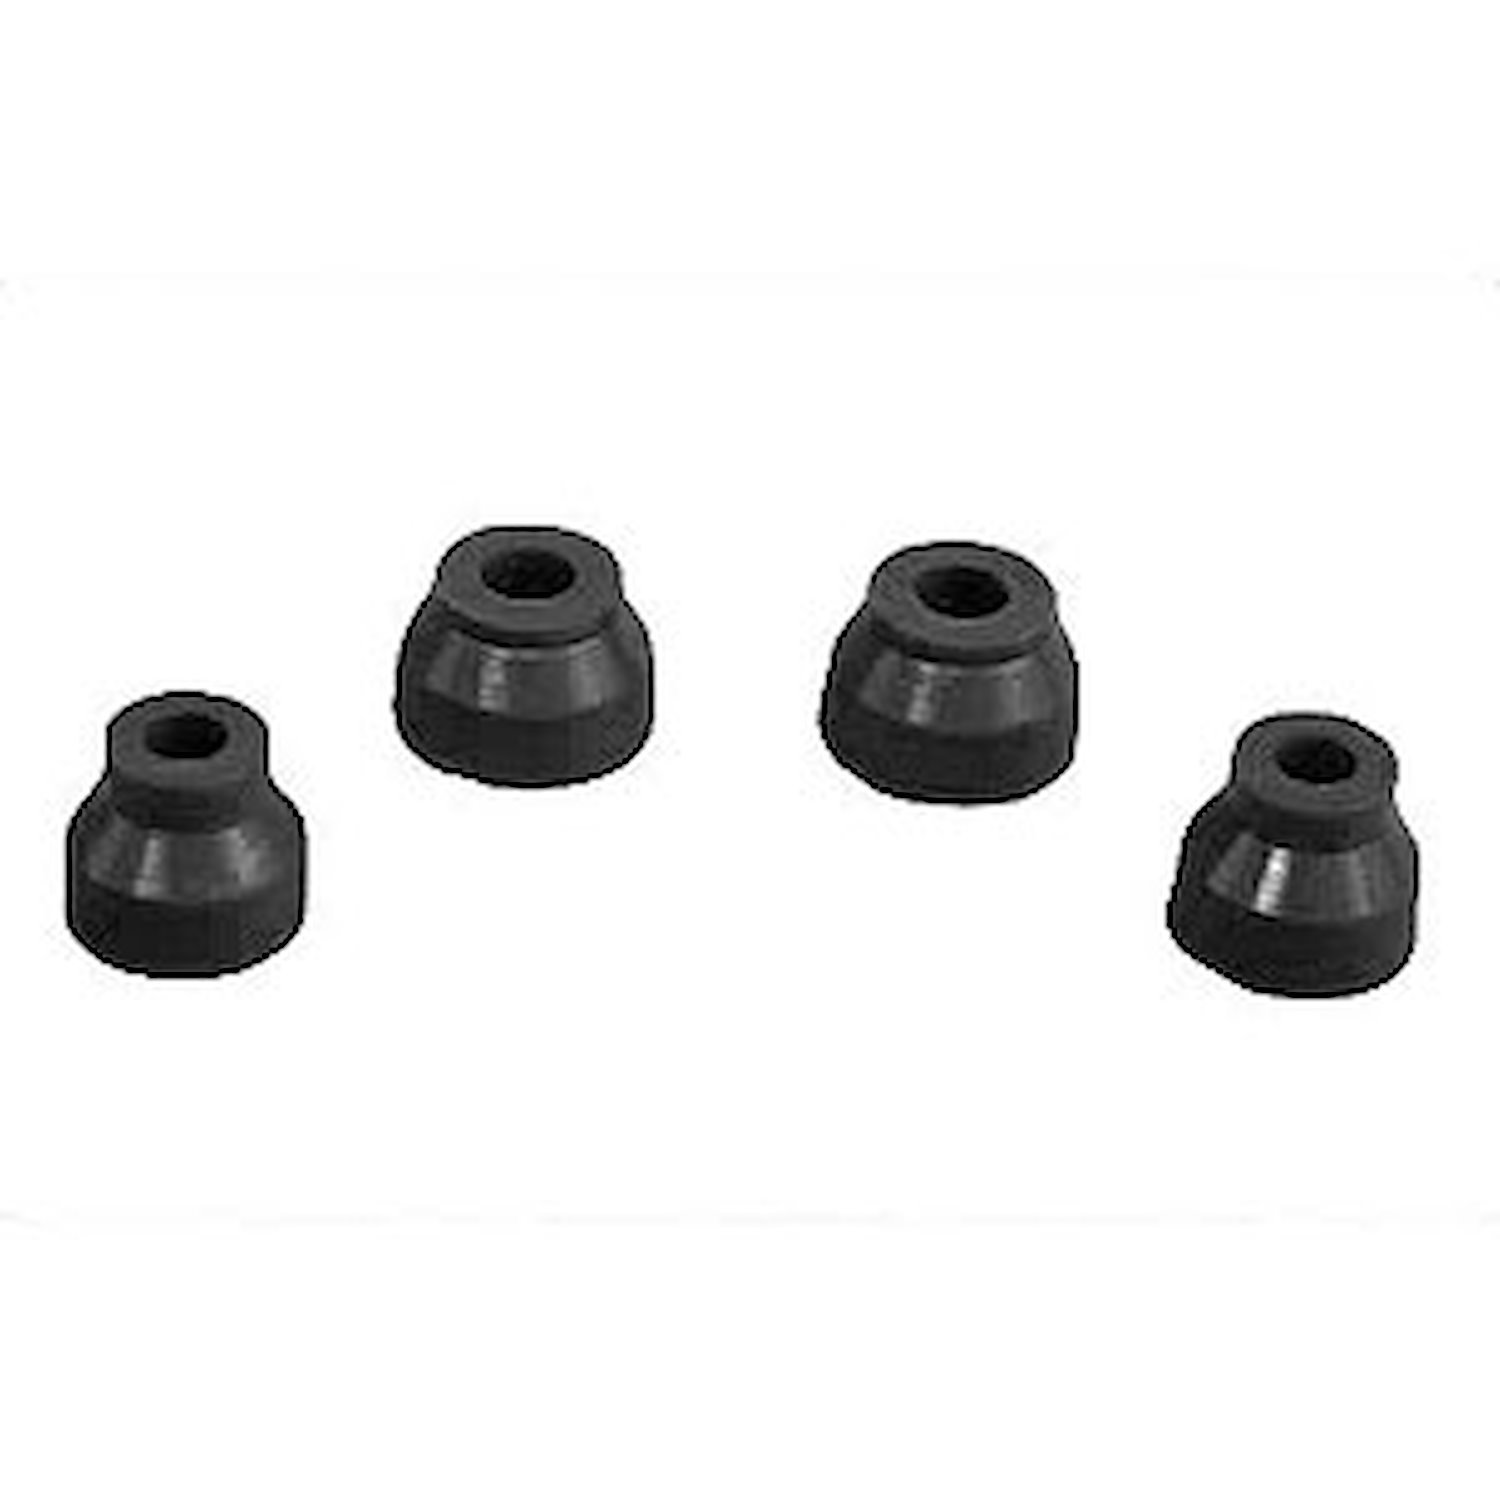 Ball Joint Boot Kit - Black 1964-1972 GM A-body